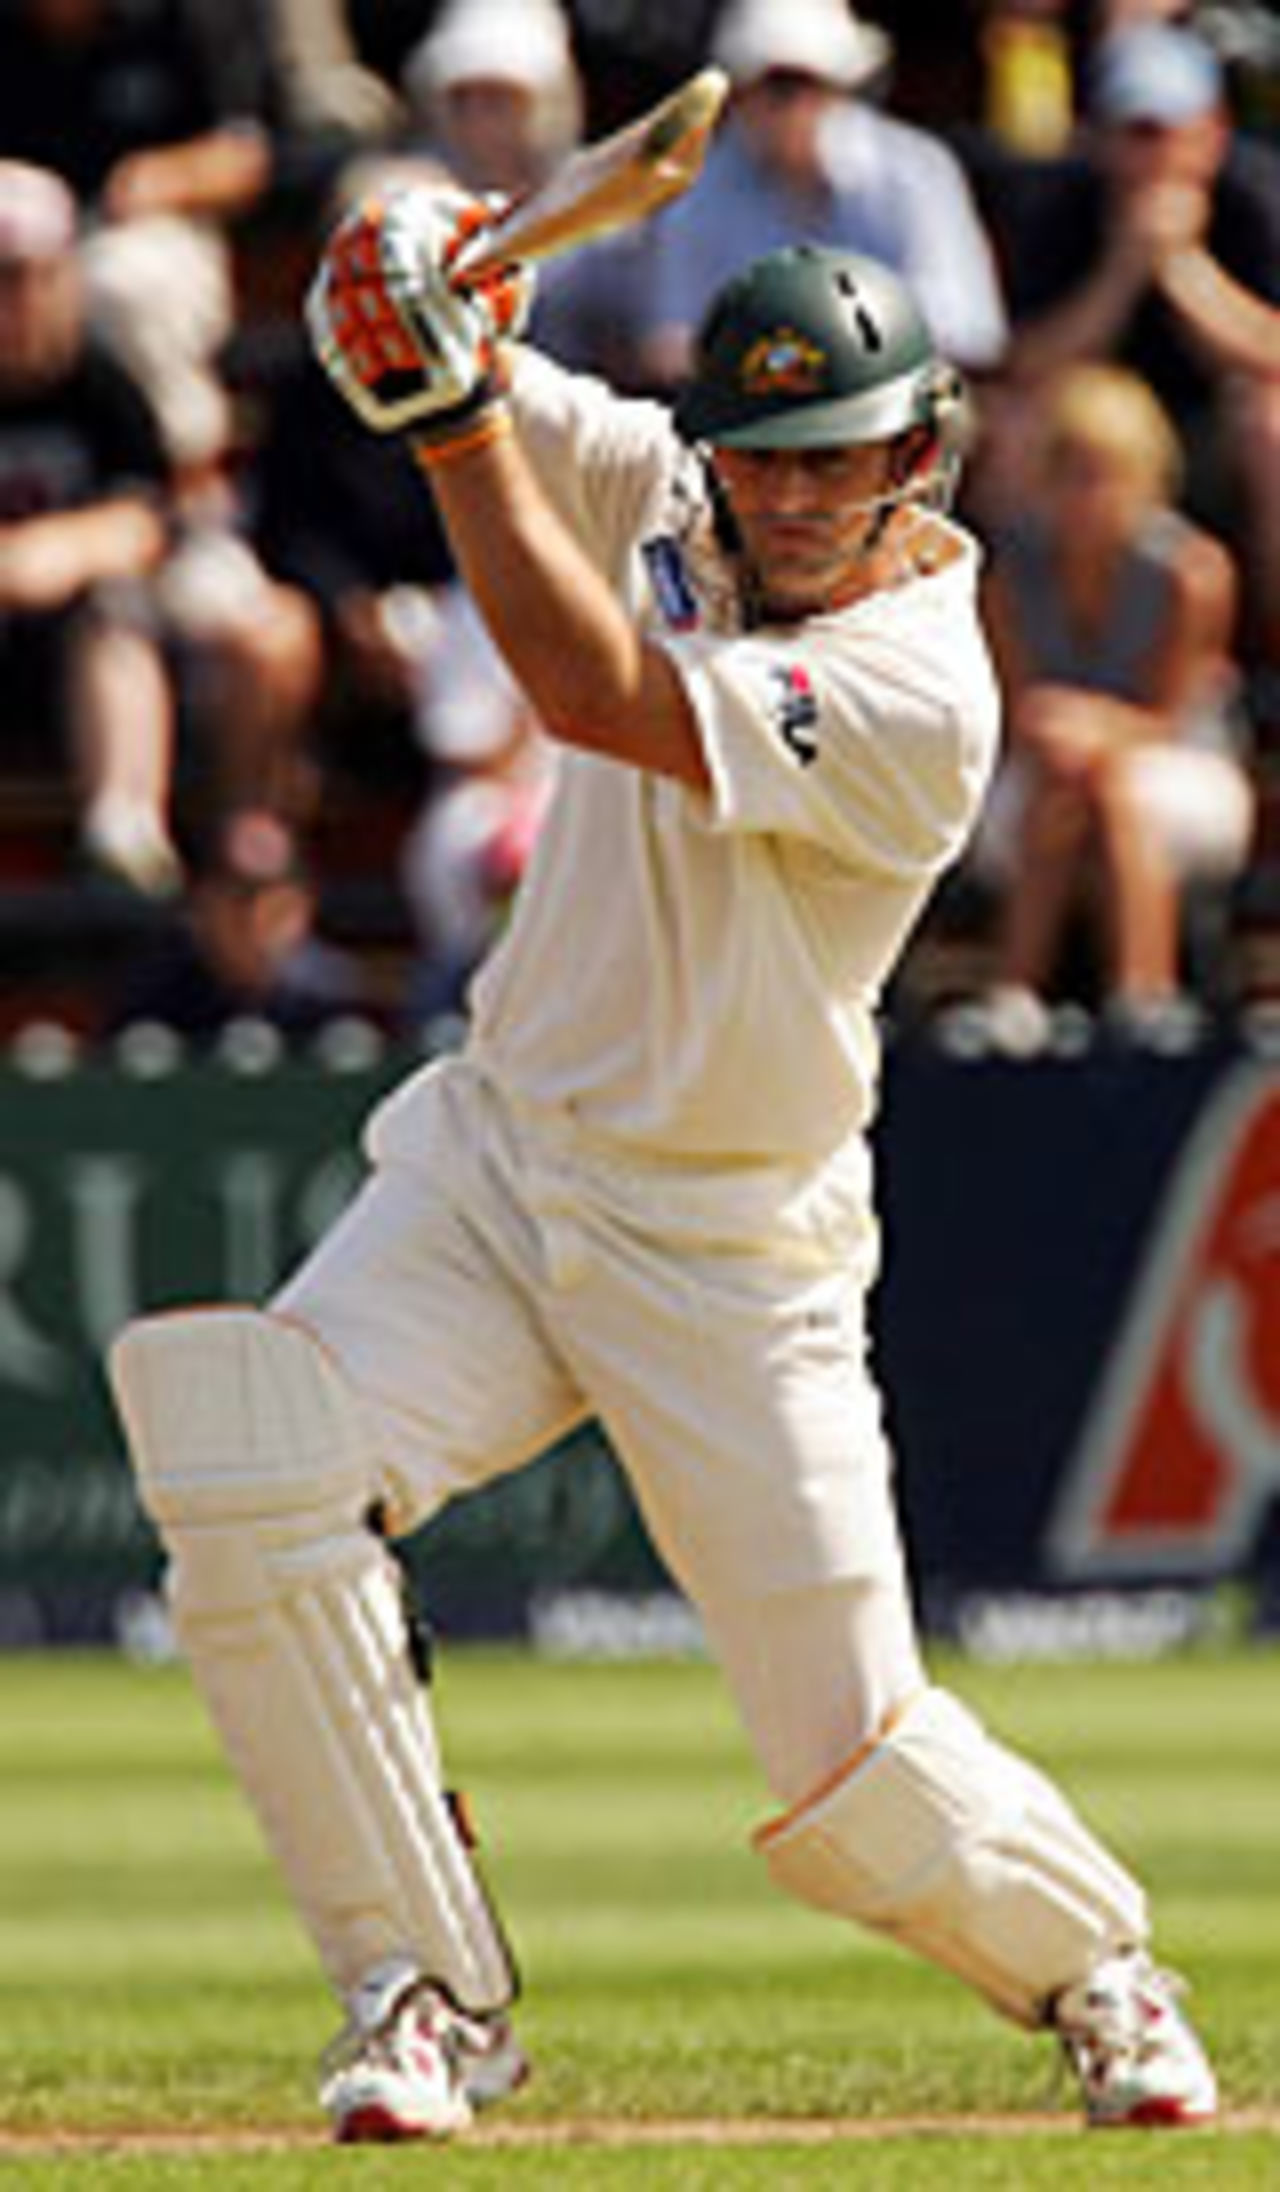 Adam Gilchrist on the drive, New Zealand v Australia, 2nd Test, Wellington, 3rd day, March 20, 2005